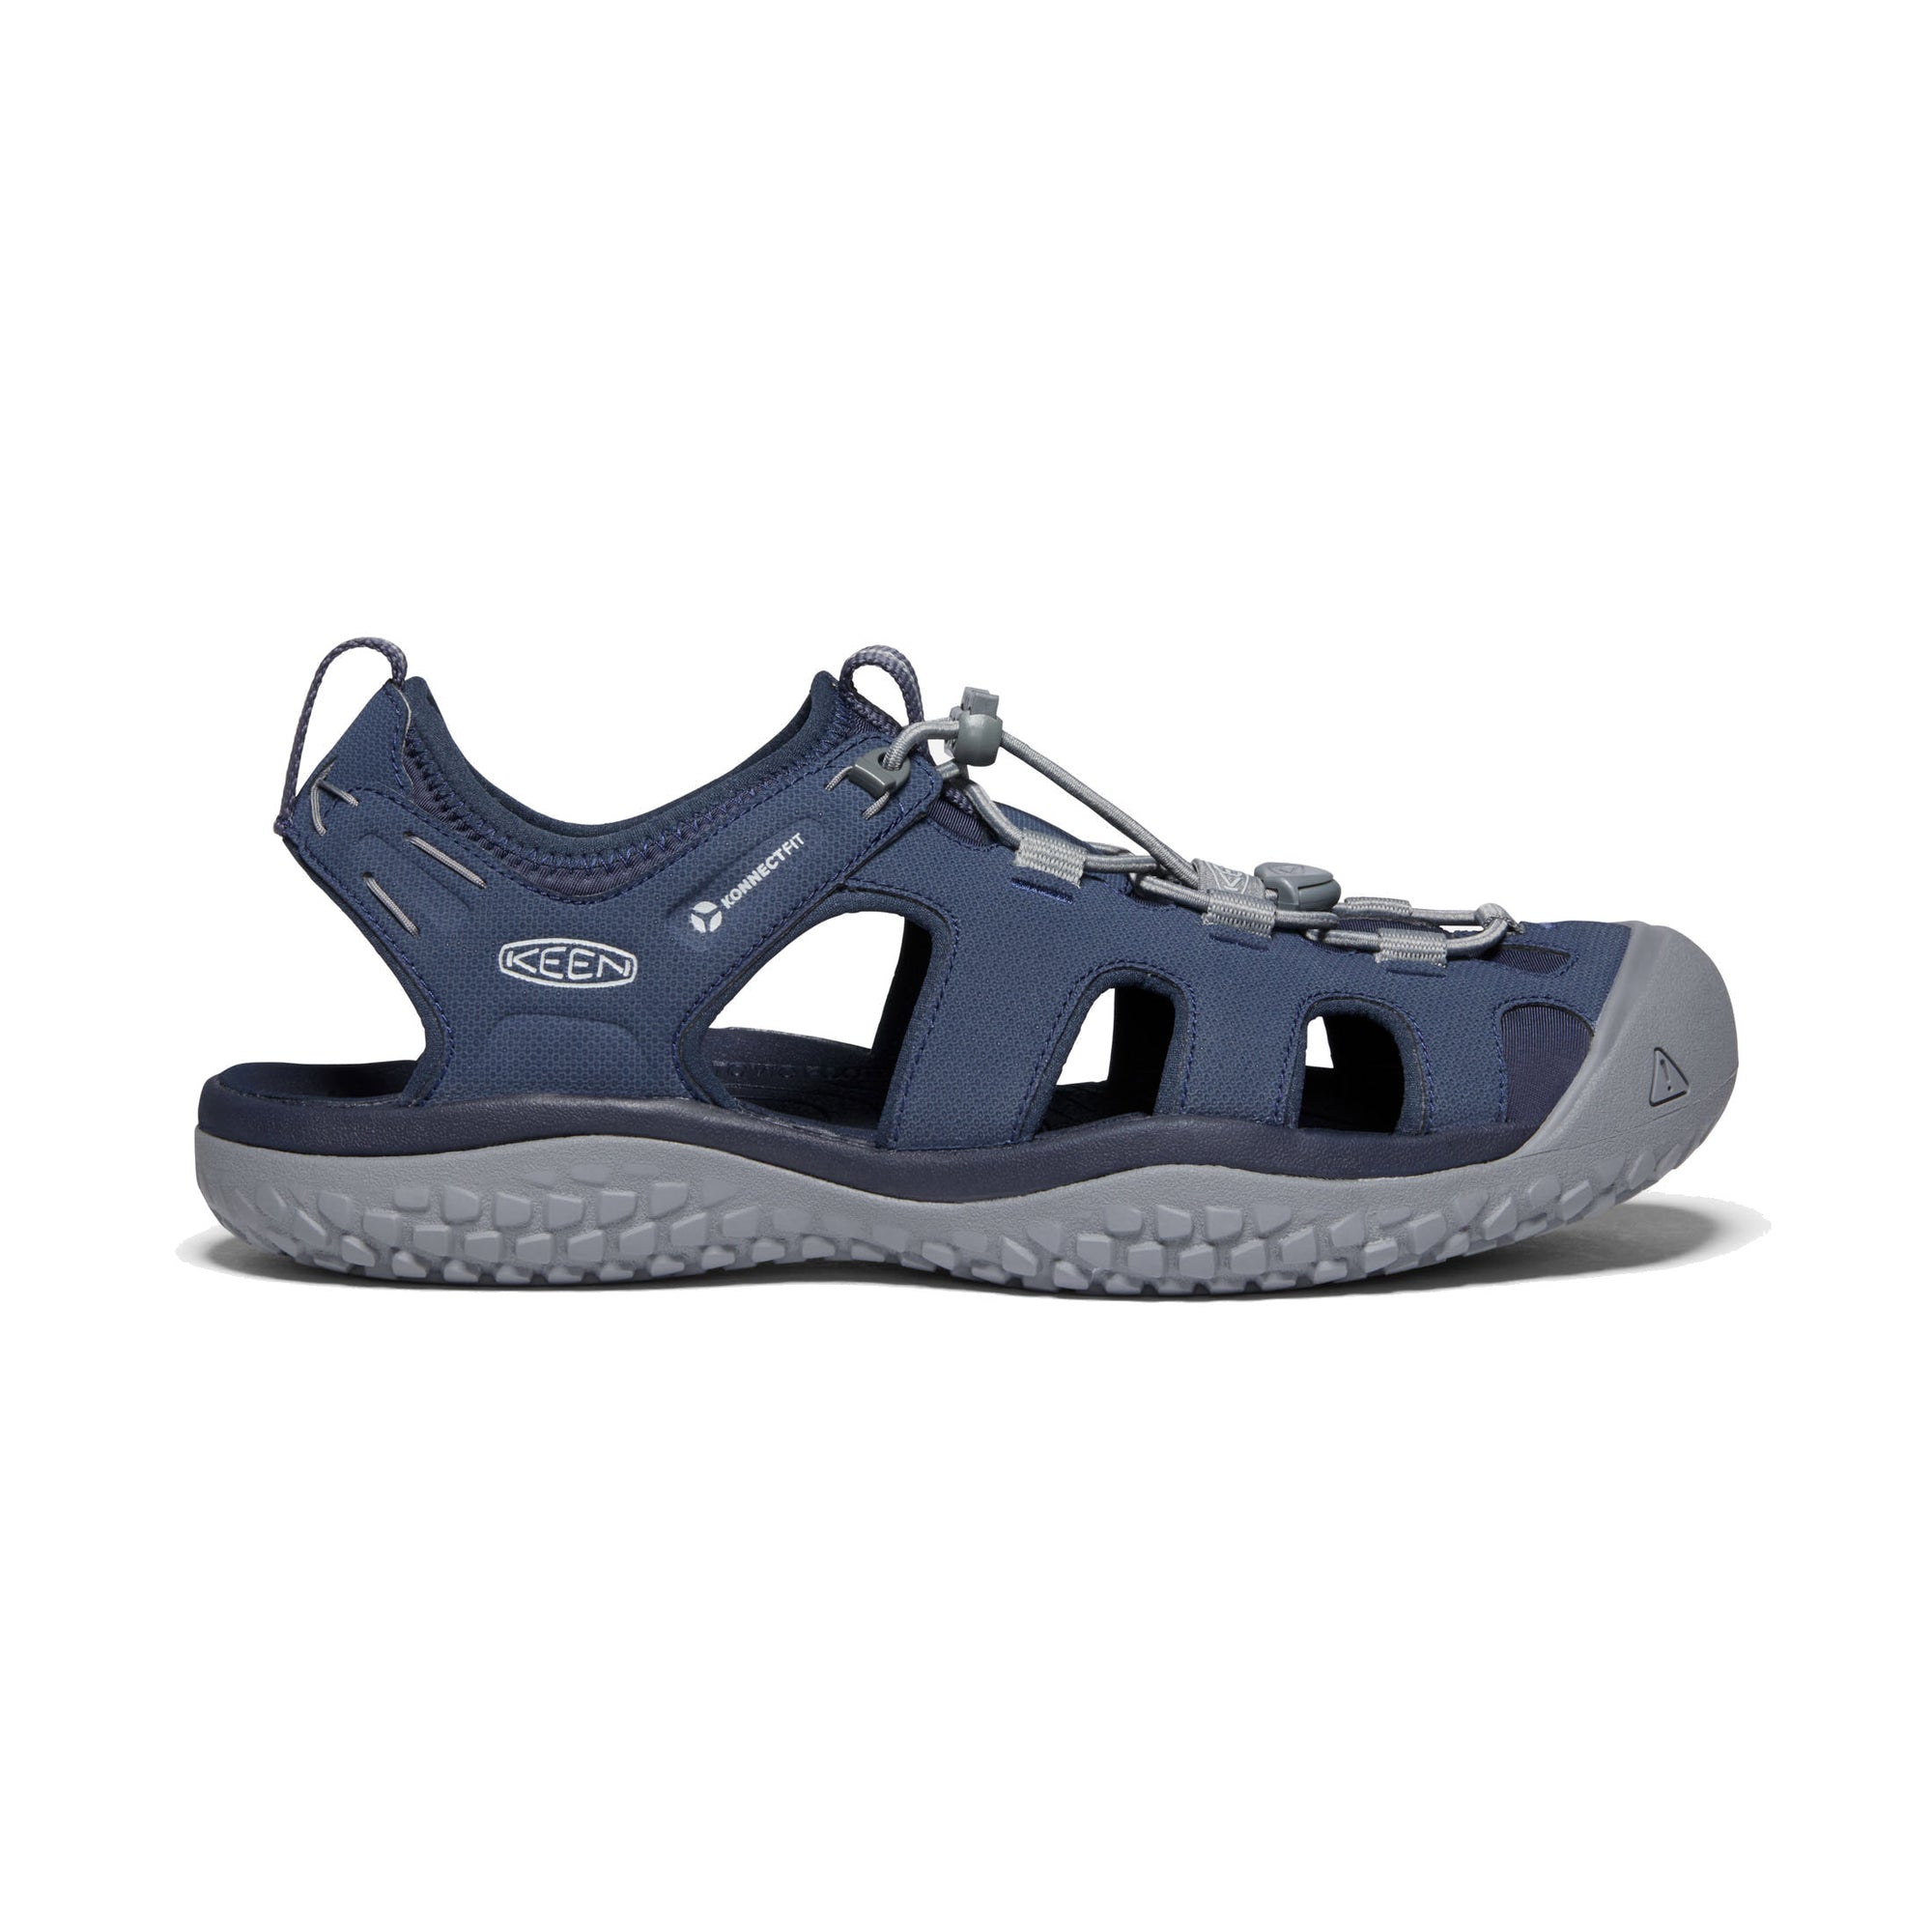 Sporty blue water-use sandal with a closed toe cap, adjustable straps, and amphibious grip on a white background. - Keen Solr Sandal Navy - Mens